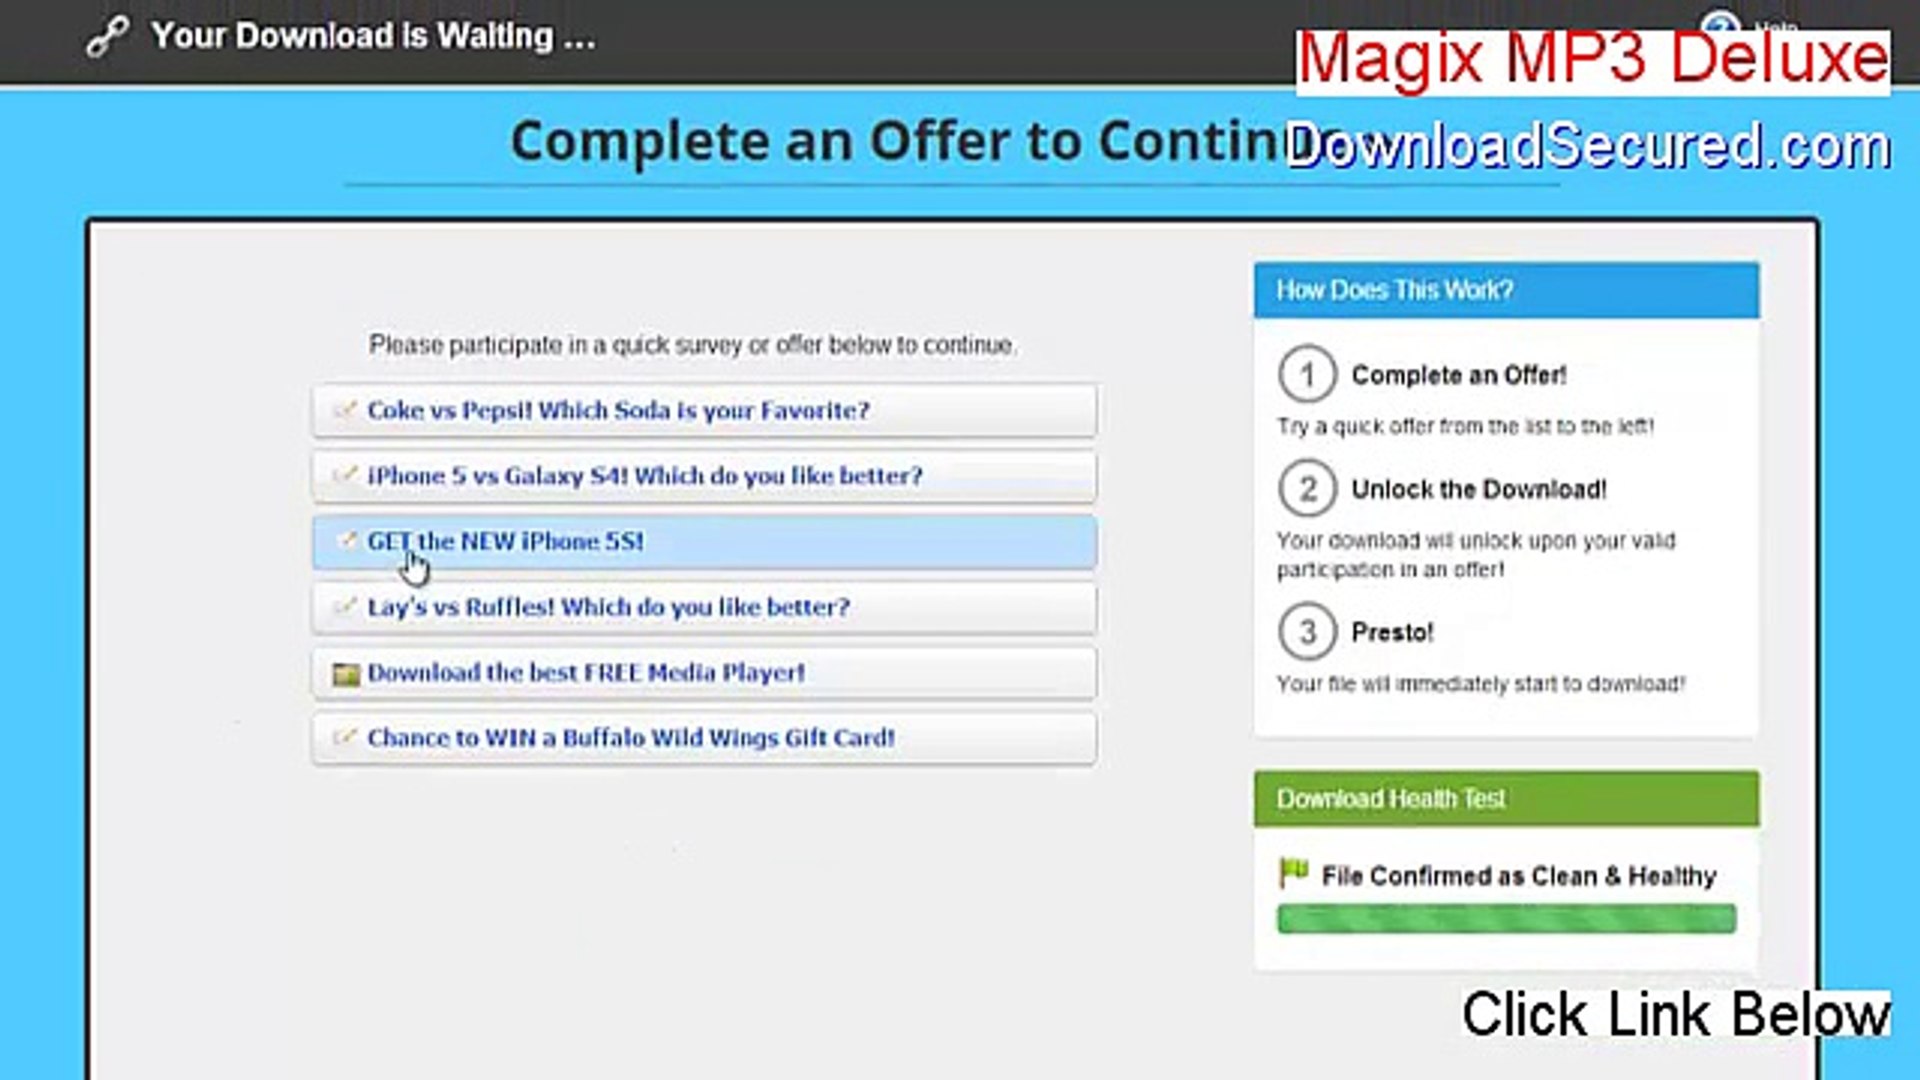 Magix MP3 Deluxe Full Download (Download Now) - video Dailymotion